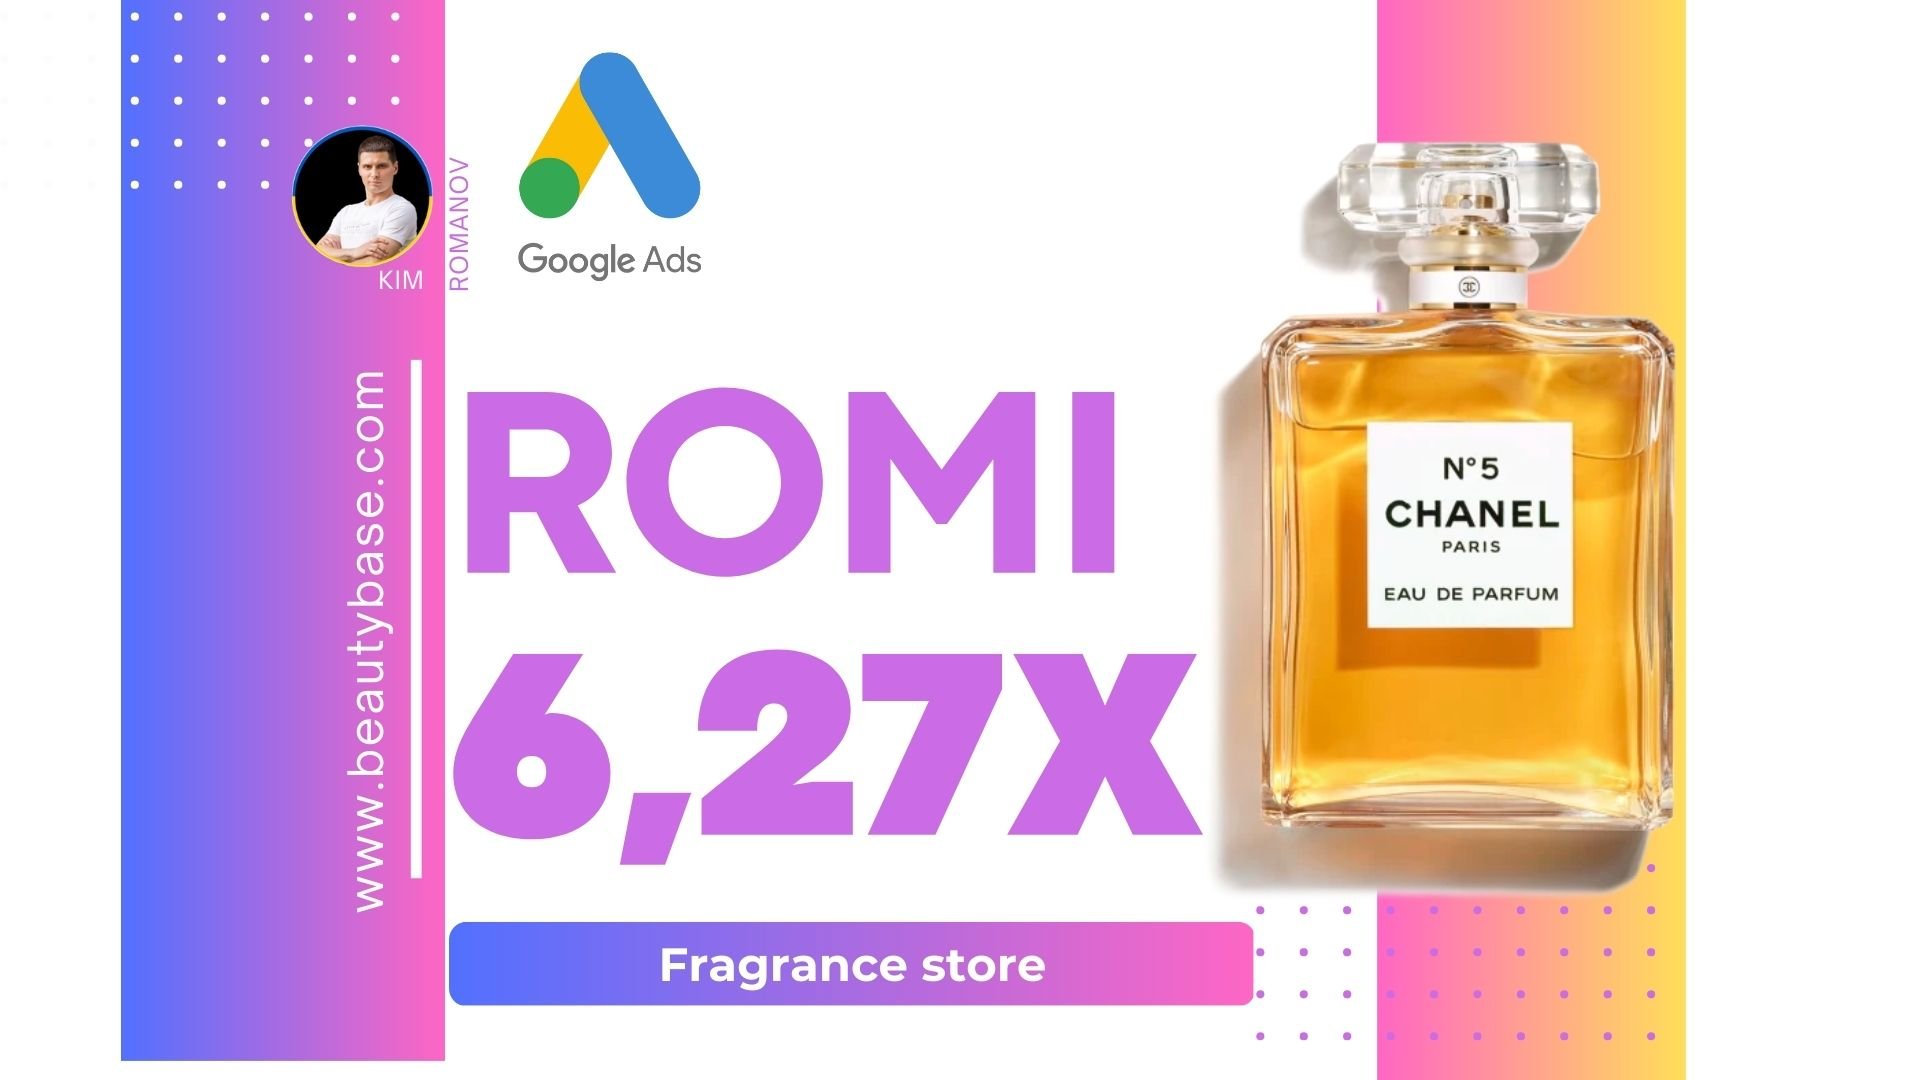 Fragrance store Increases Sales by 627% with Google Ads | Case Study